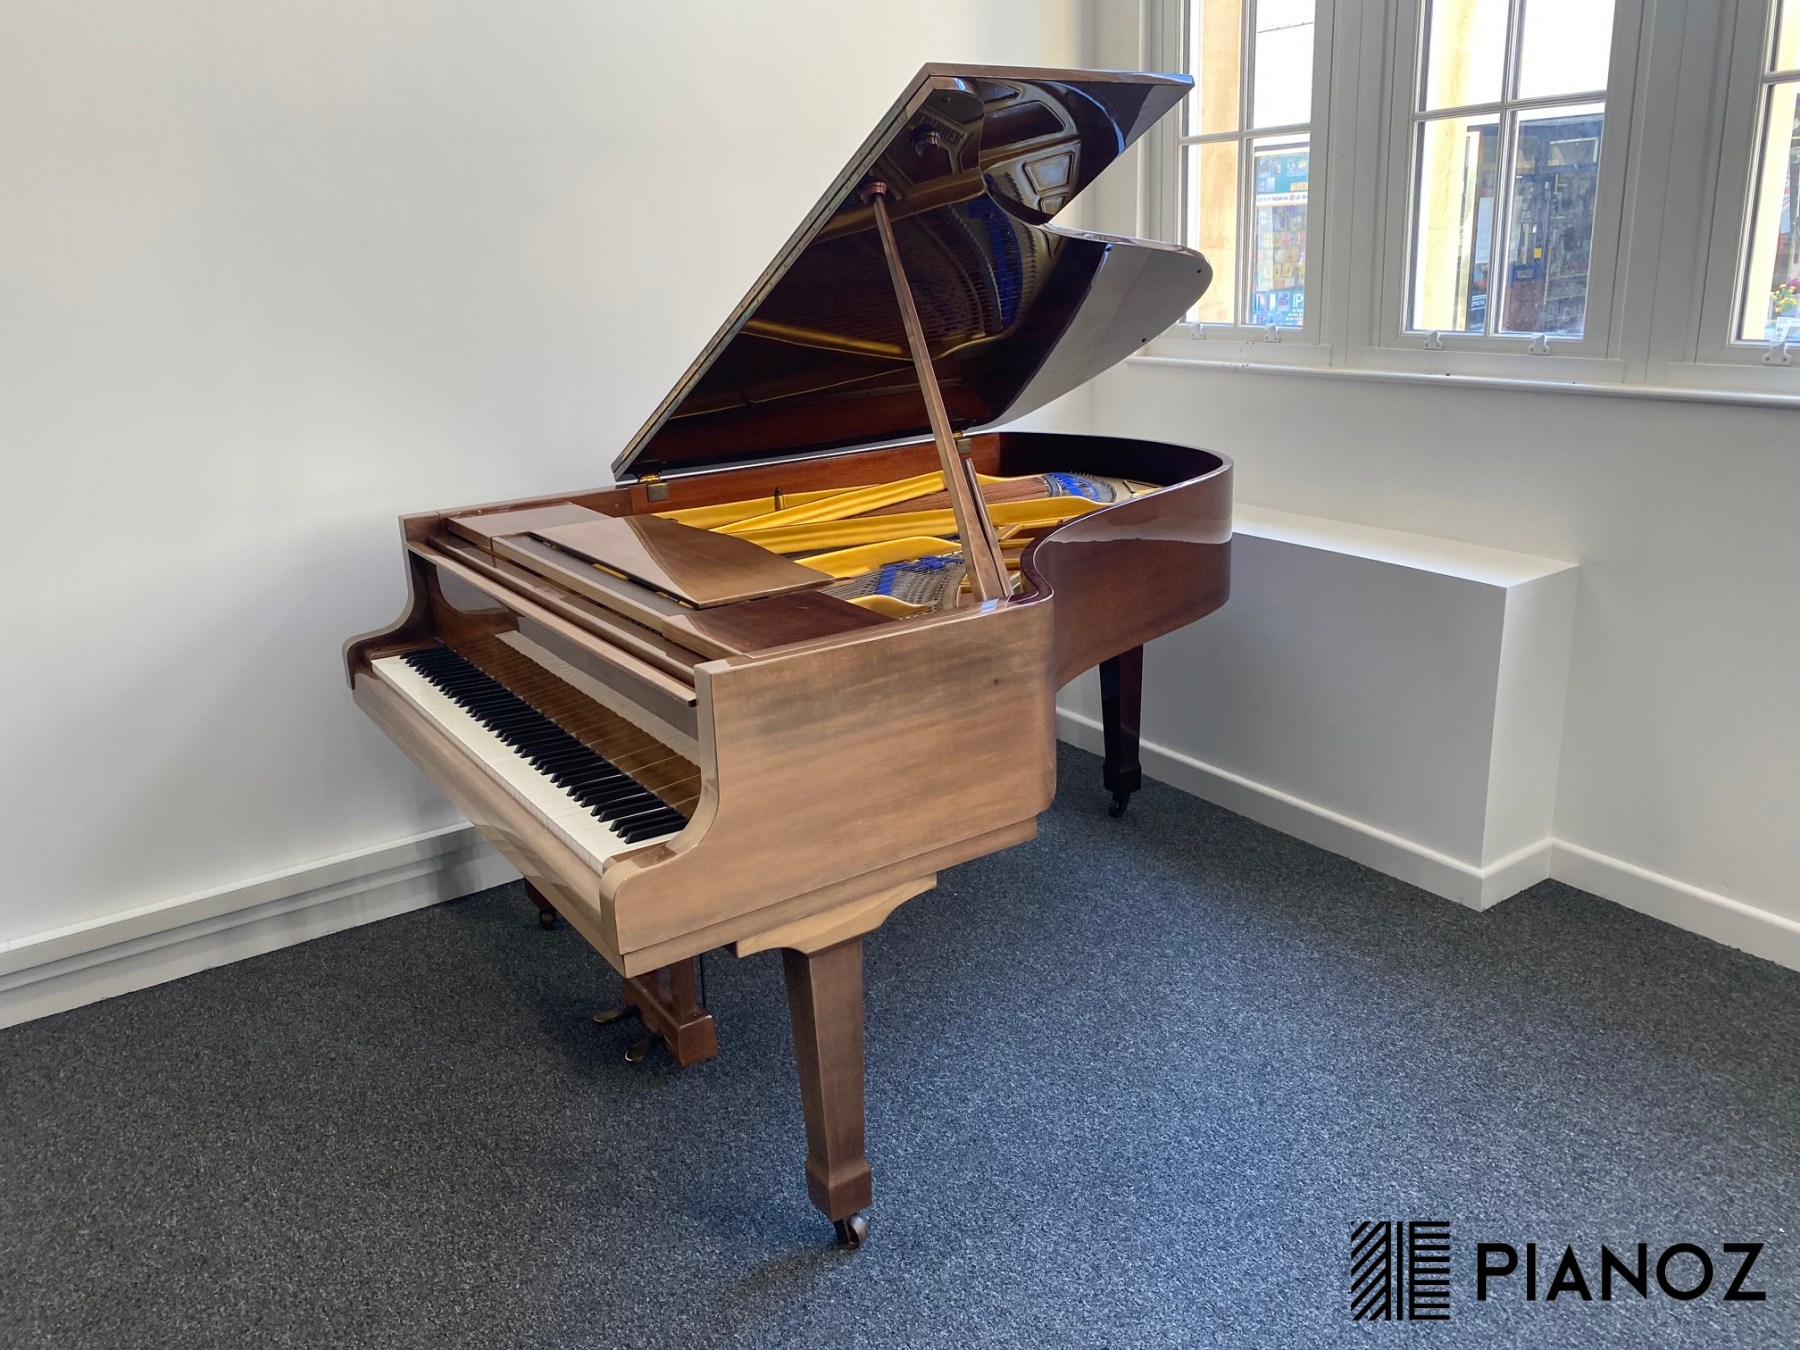 Bluthner Model 6 Grand Piano piano for sale in UK